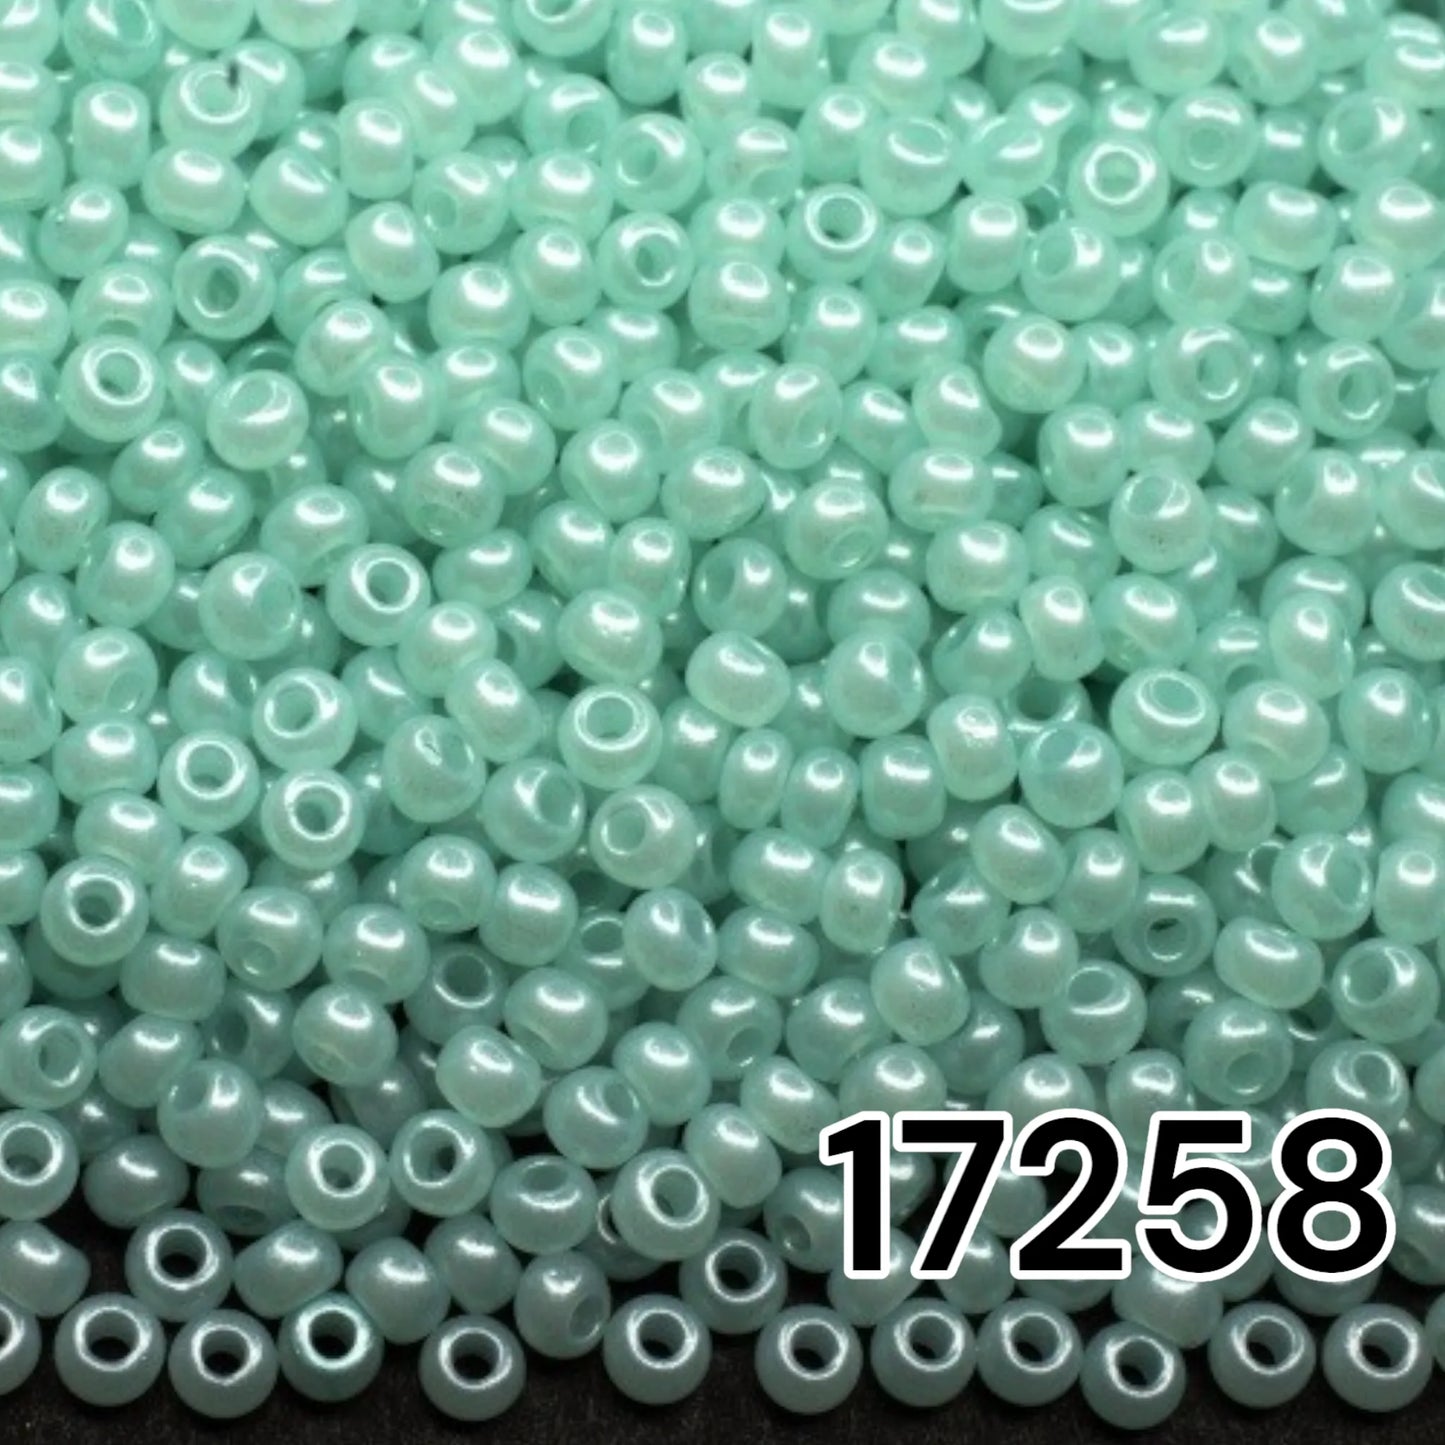 17258 Czech seed beads PRECIOSA round 10/0 turquoise. Alabaster - Terra Pearl.